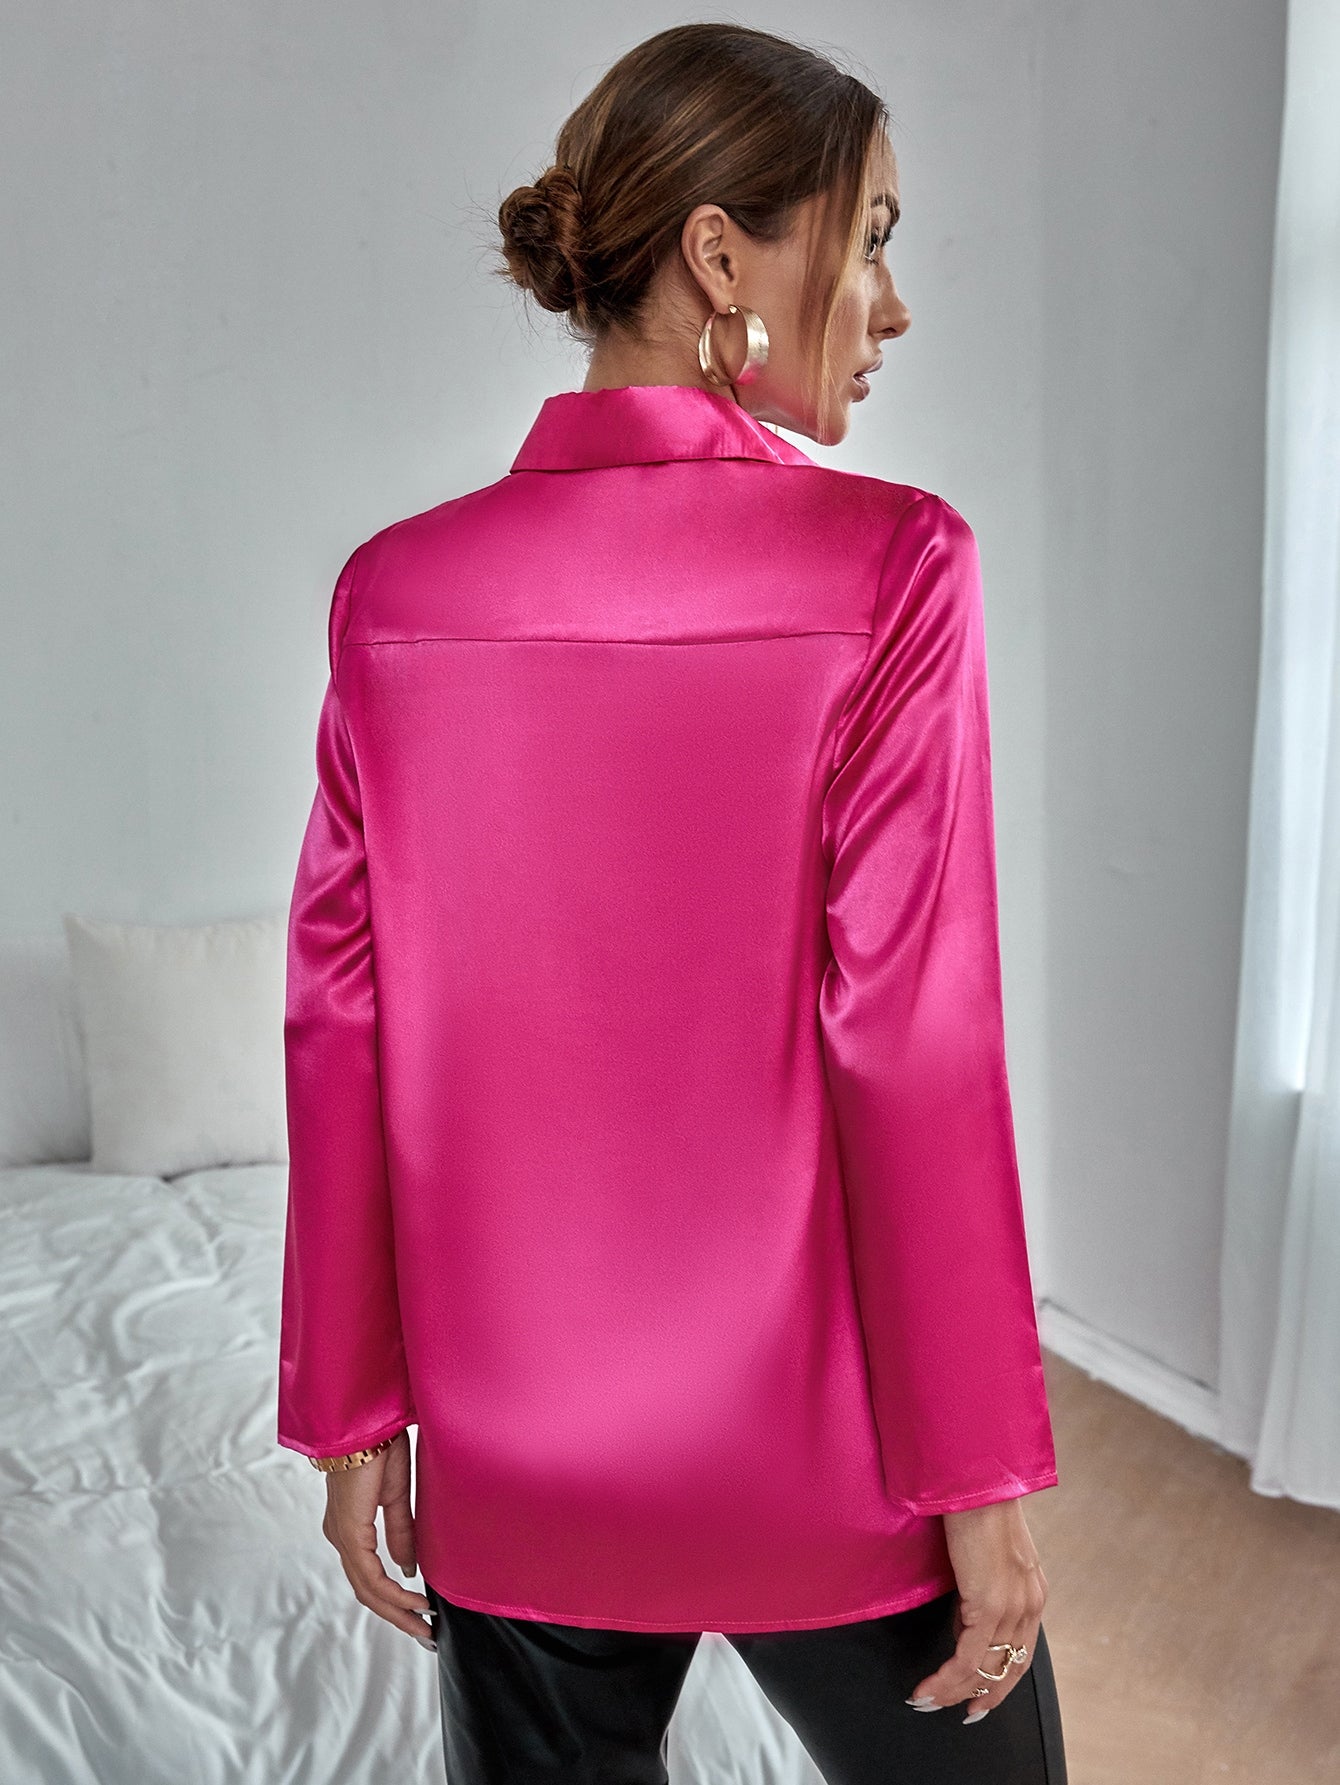 Hot Pink Solid Button Front Satin Blouse Top Shirt